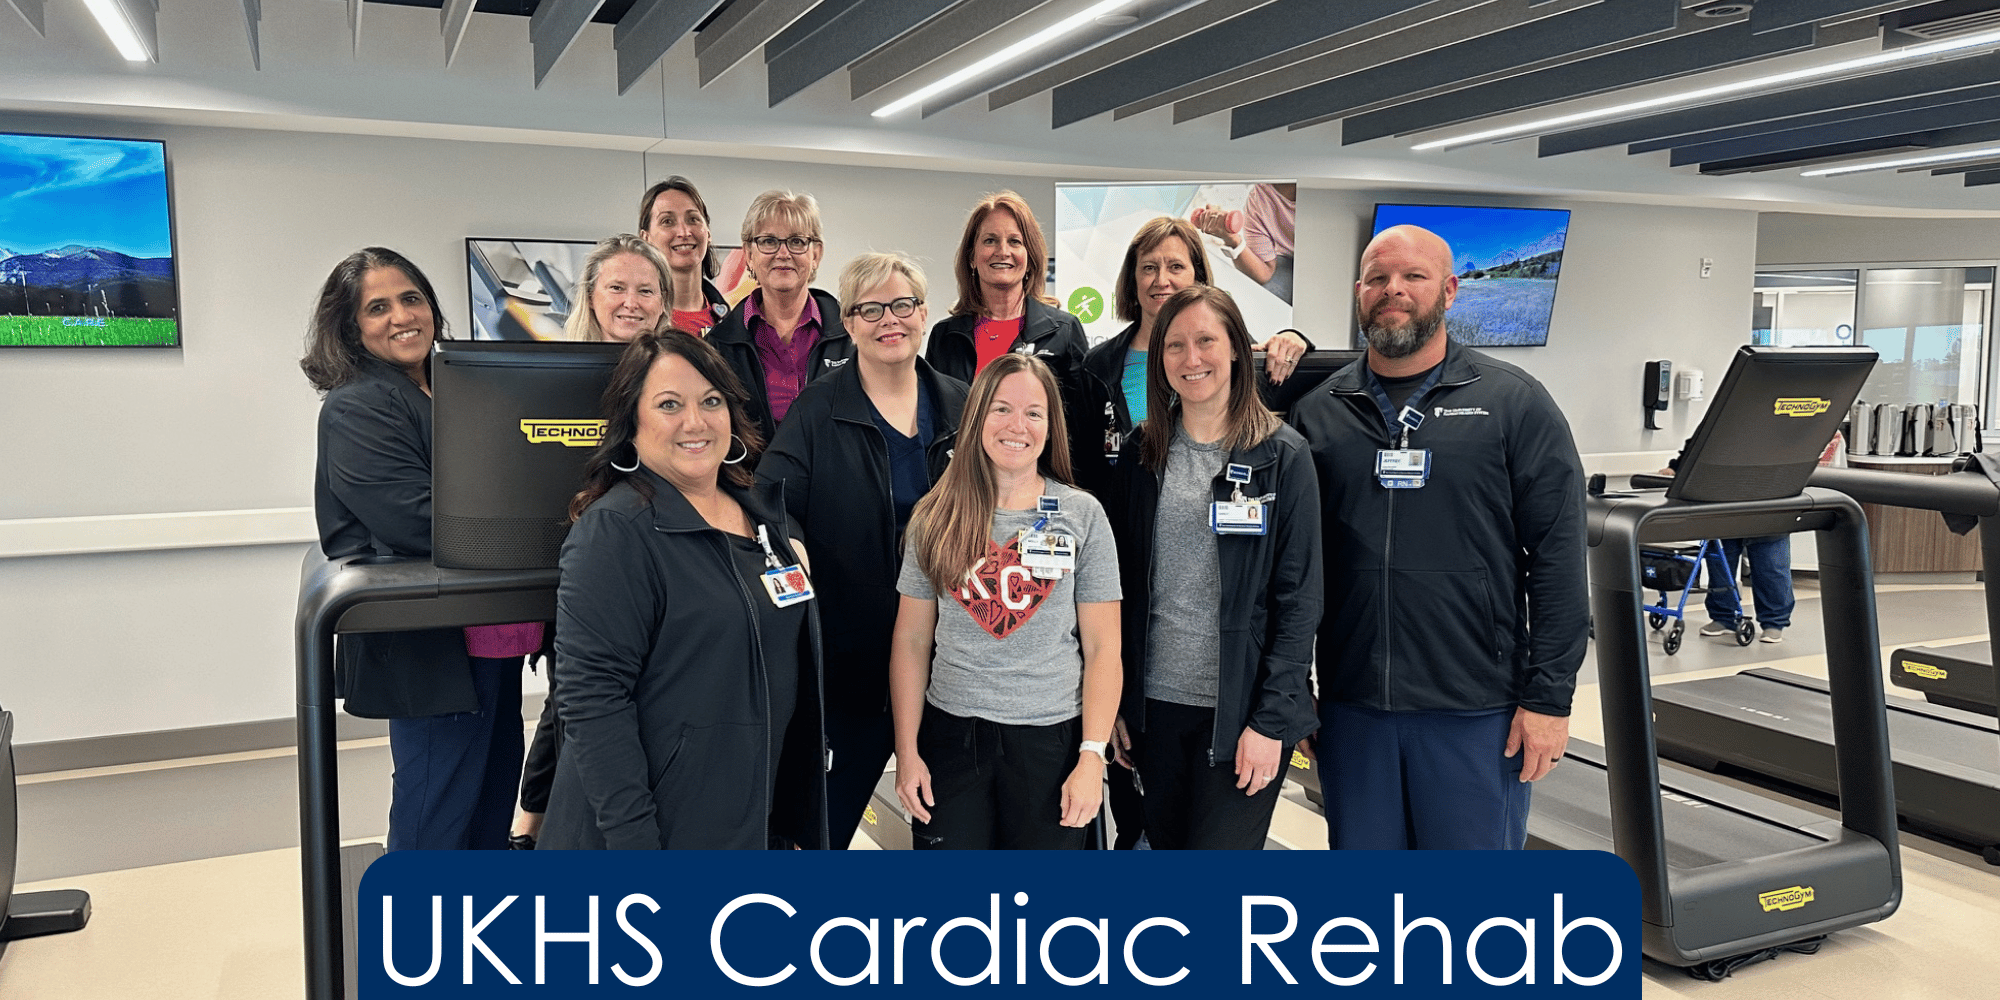 Eleven Cardiac Rehab professionals standing in the exercise area of their facility. All are smiling at the camera and wearing scrubs. At the bottom of the picture, reads "UKHS Cardiac Rehab"